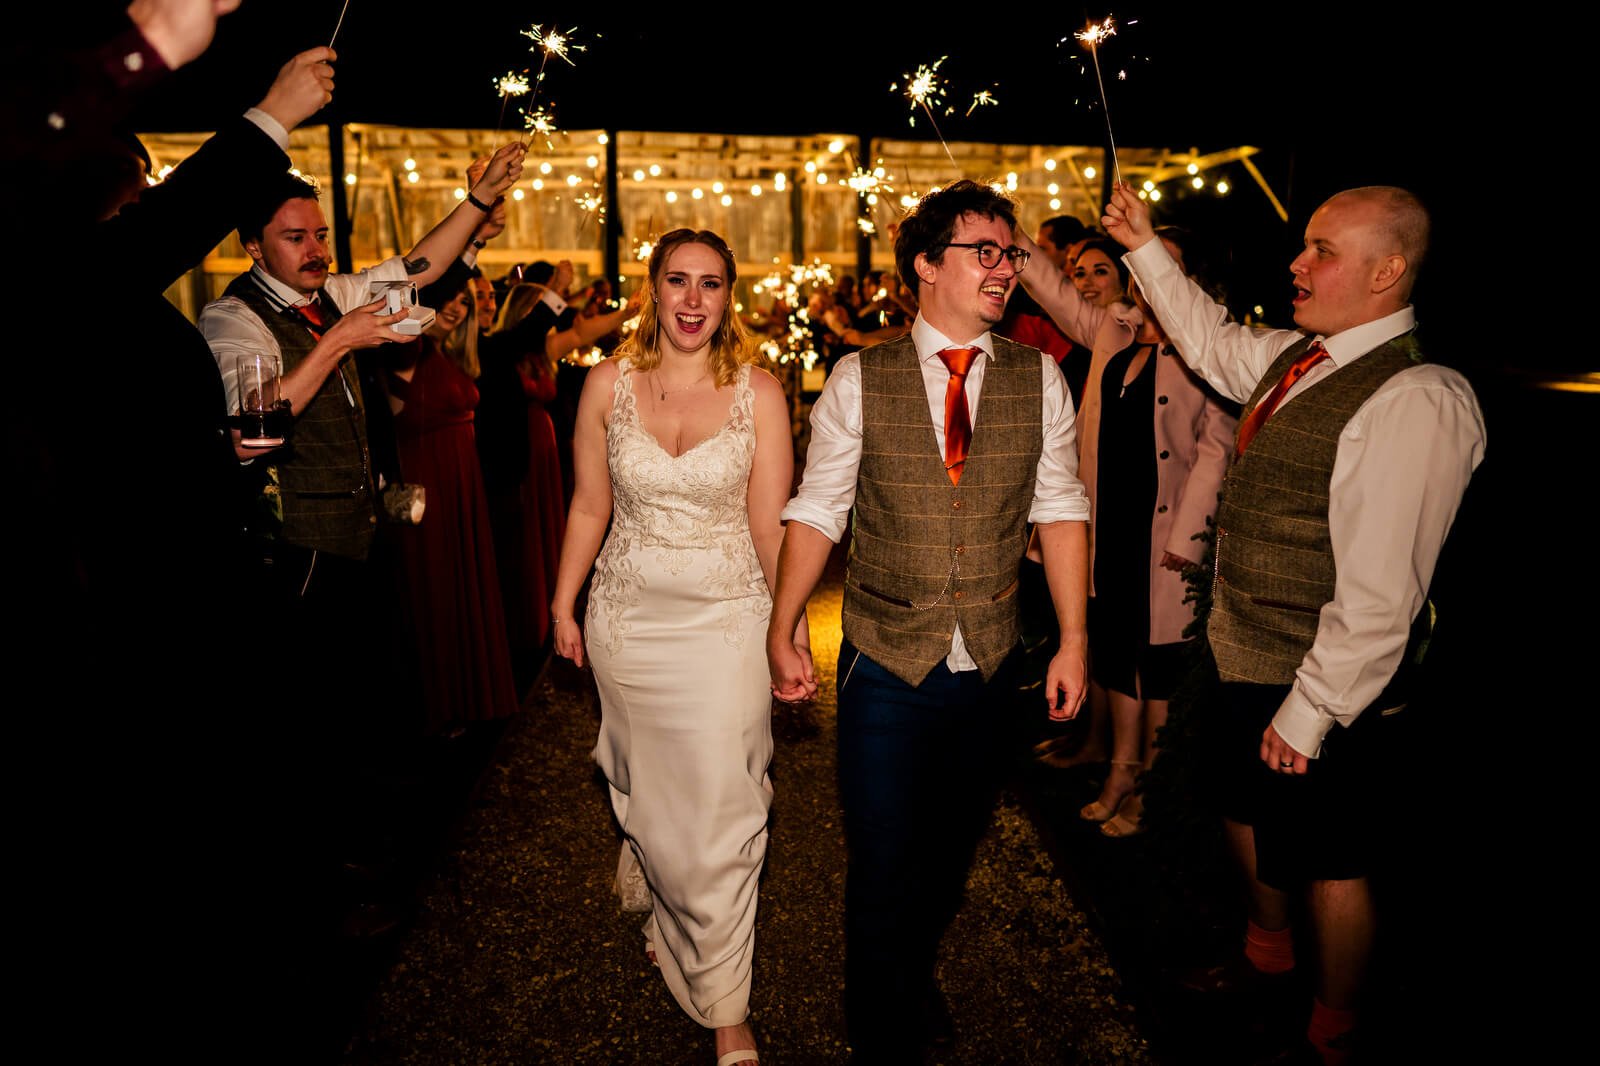 sparkers at silchester farm wedding